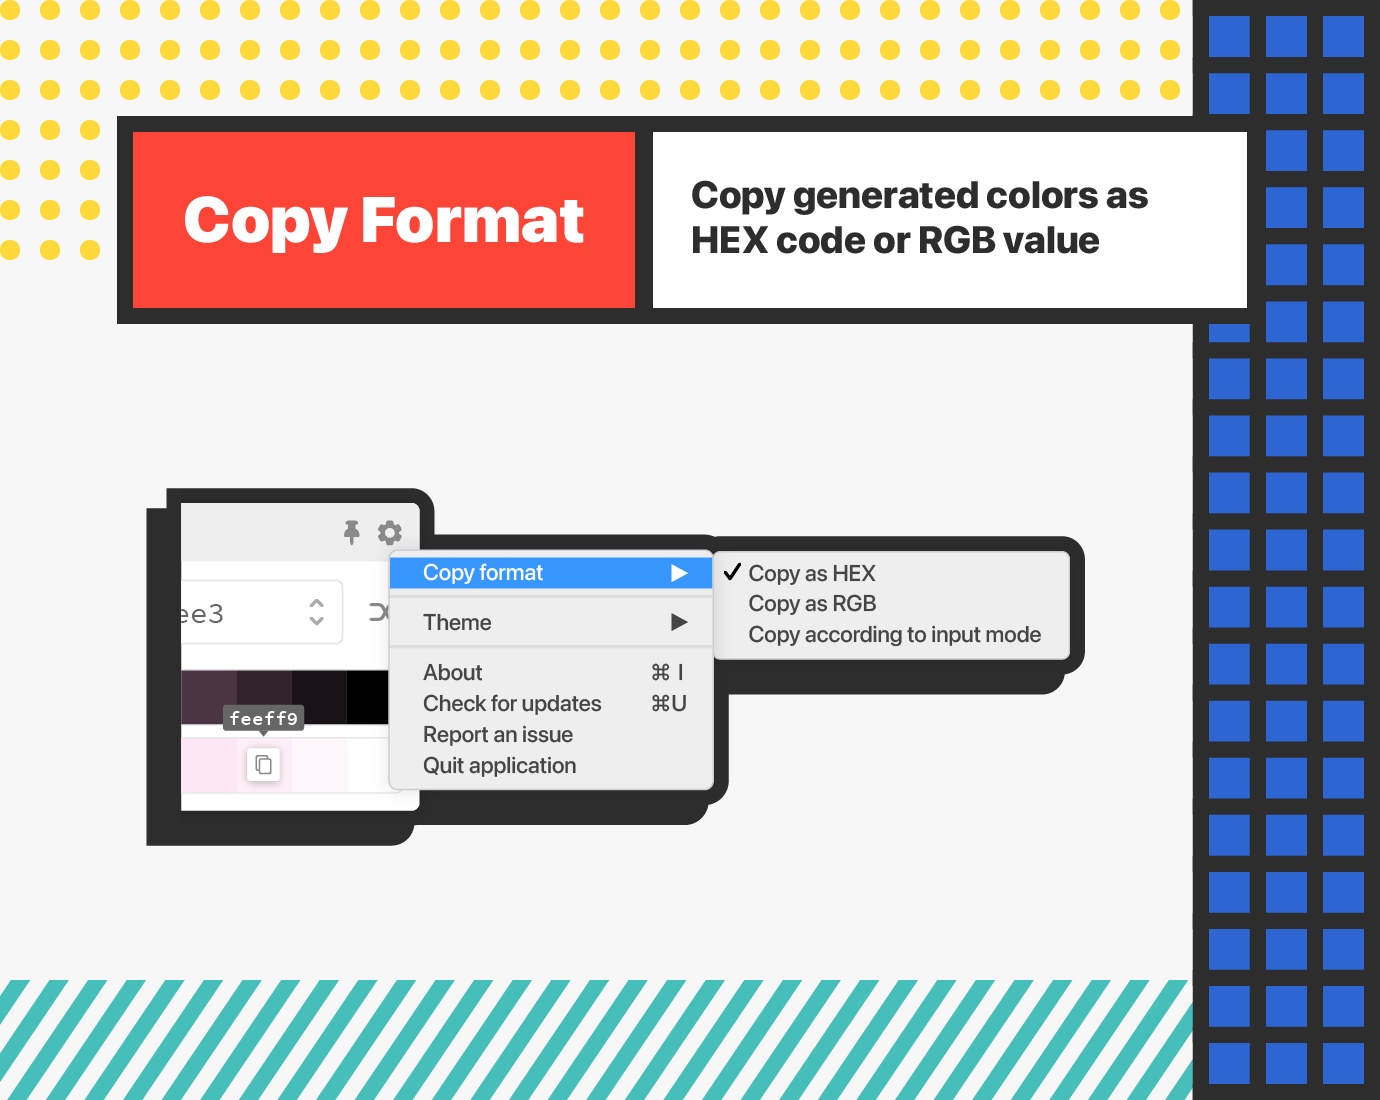 Copy format - Copy generated colors as HEX code or RGB value